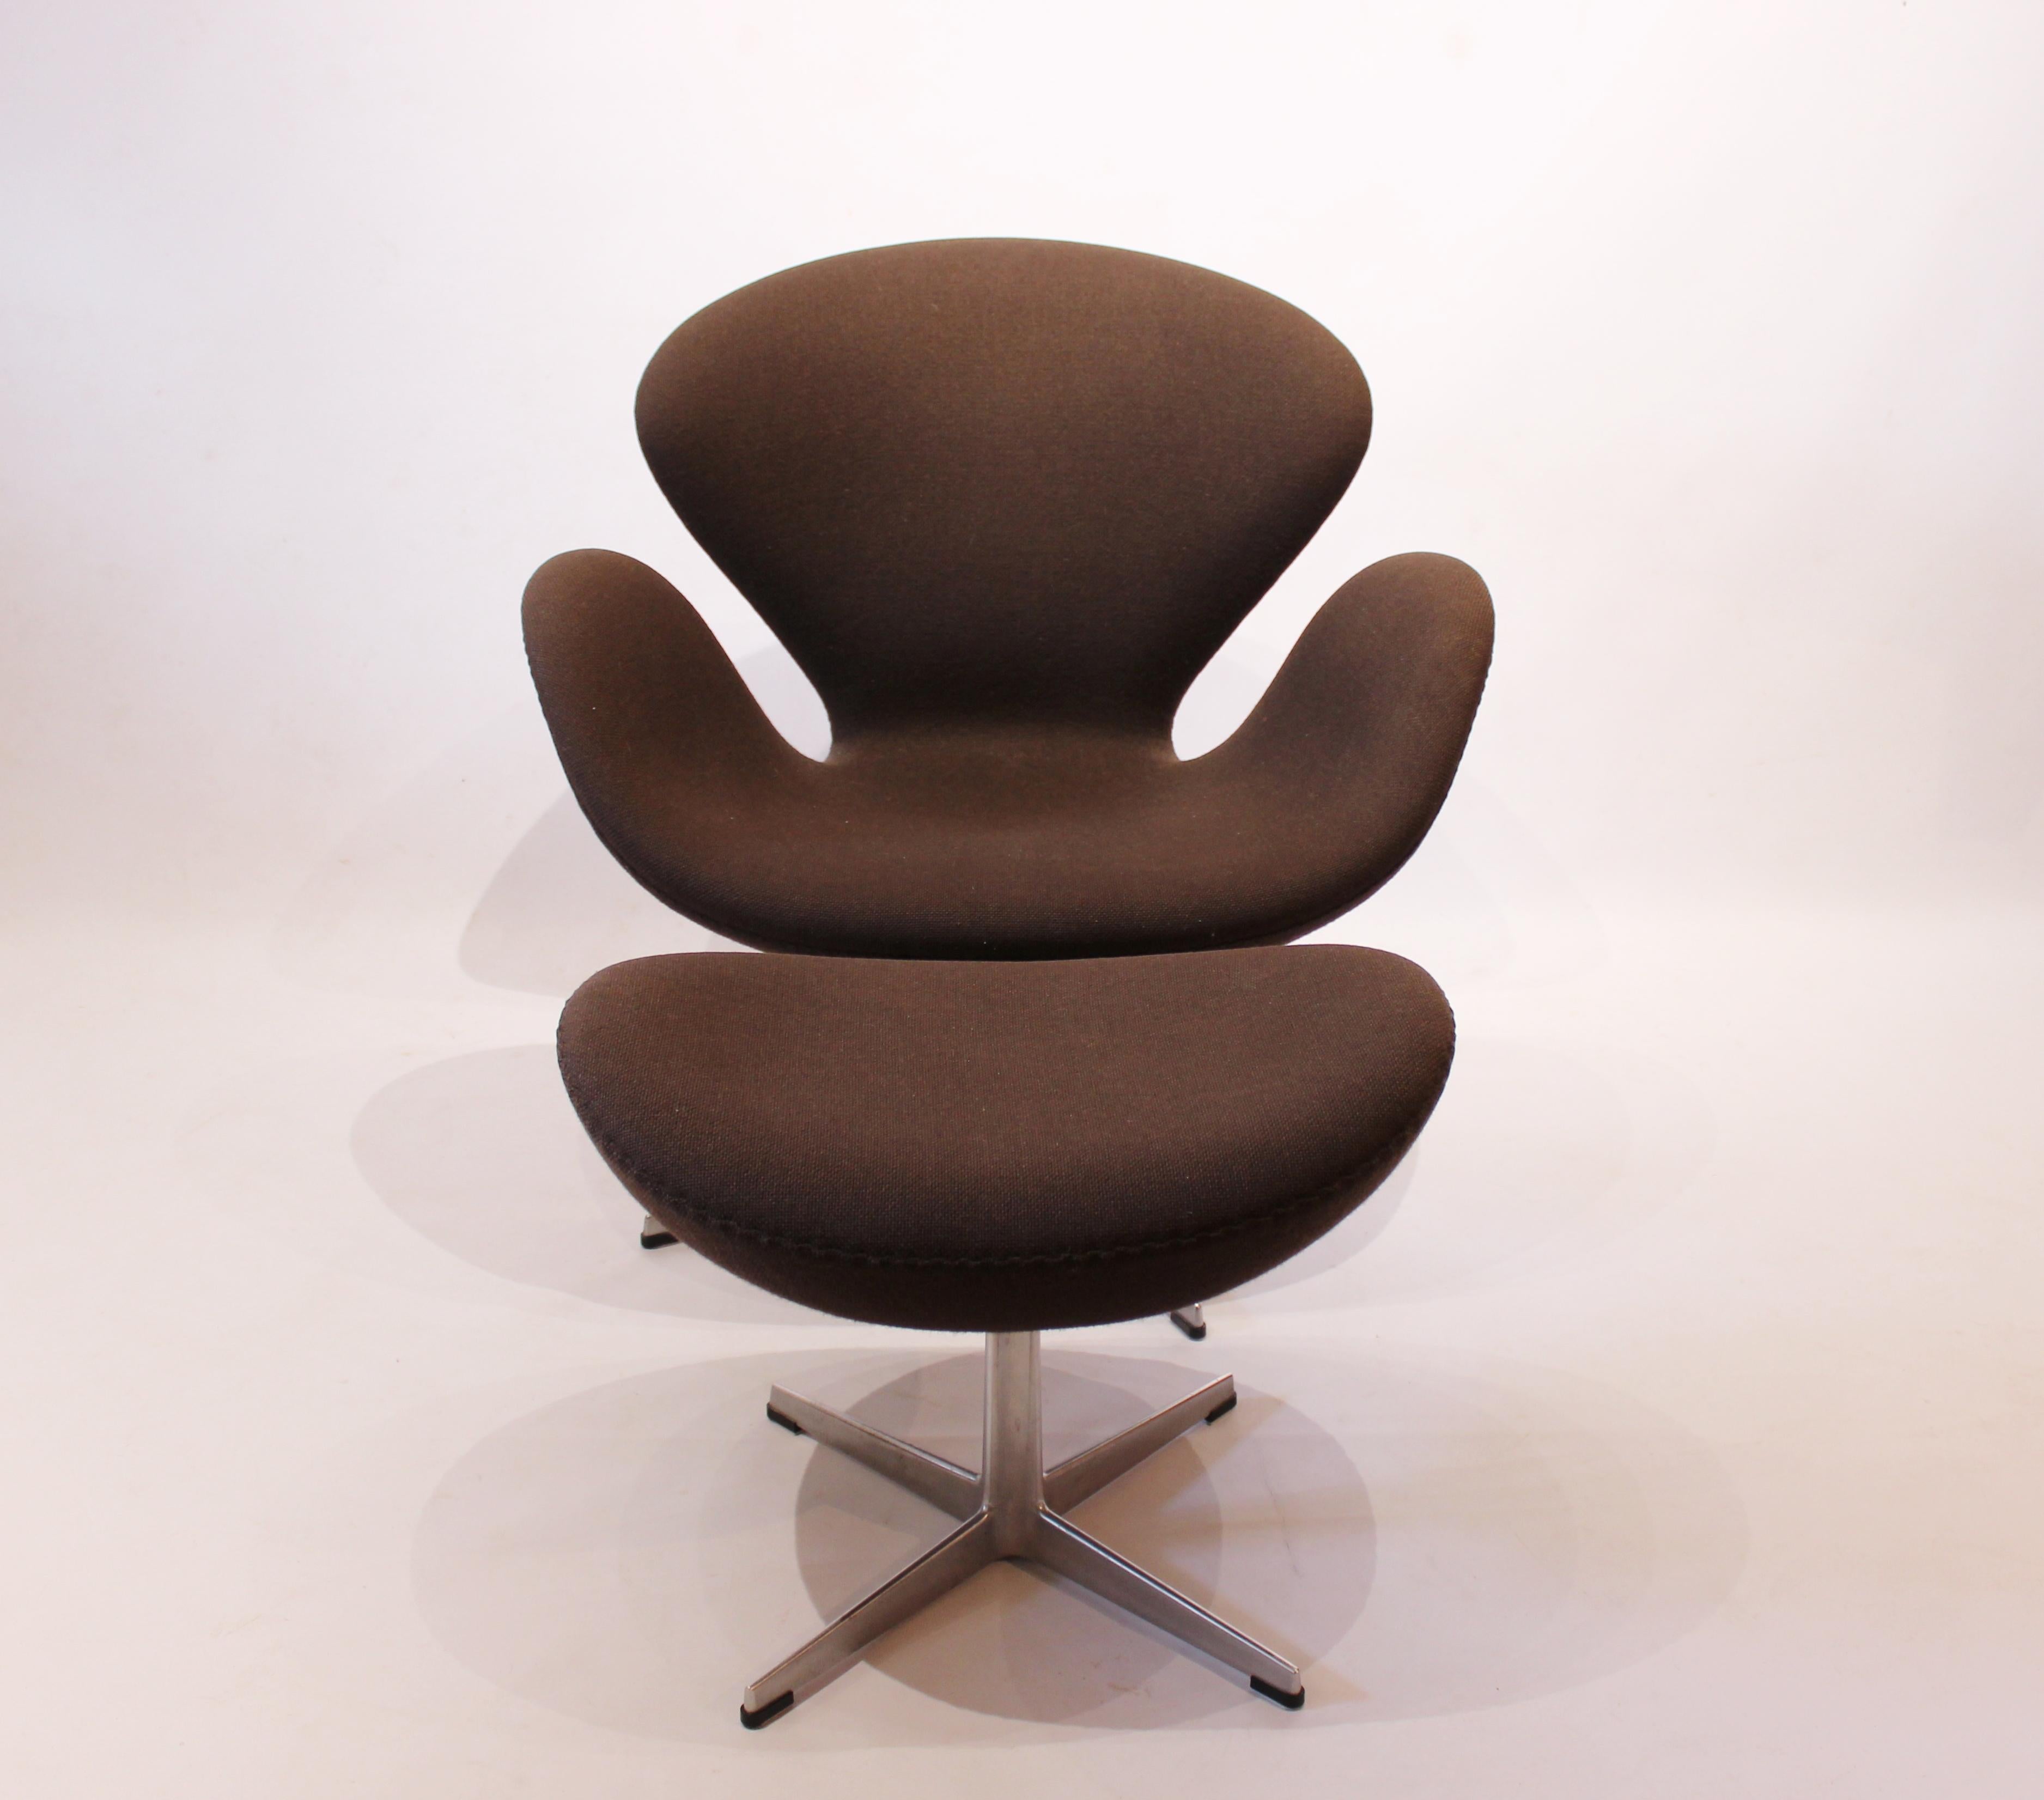 The Swan chair, model 3320, and stool, model 3127, designed by Arne Jacobsen in 1958 and manufactured by Fritz Hansen in 2001/2003. Both are upholstered with dark brown wool fabric and in great vintage condition. Stool measurements: H - 37 cm, W -